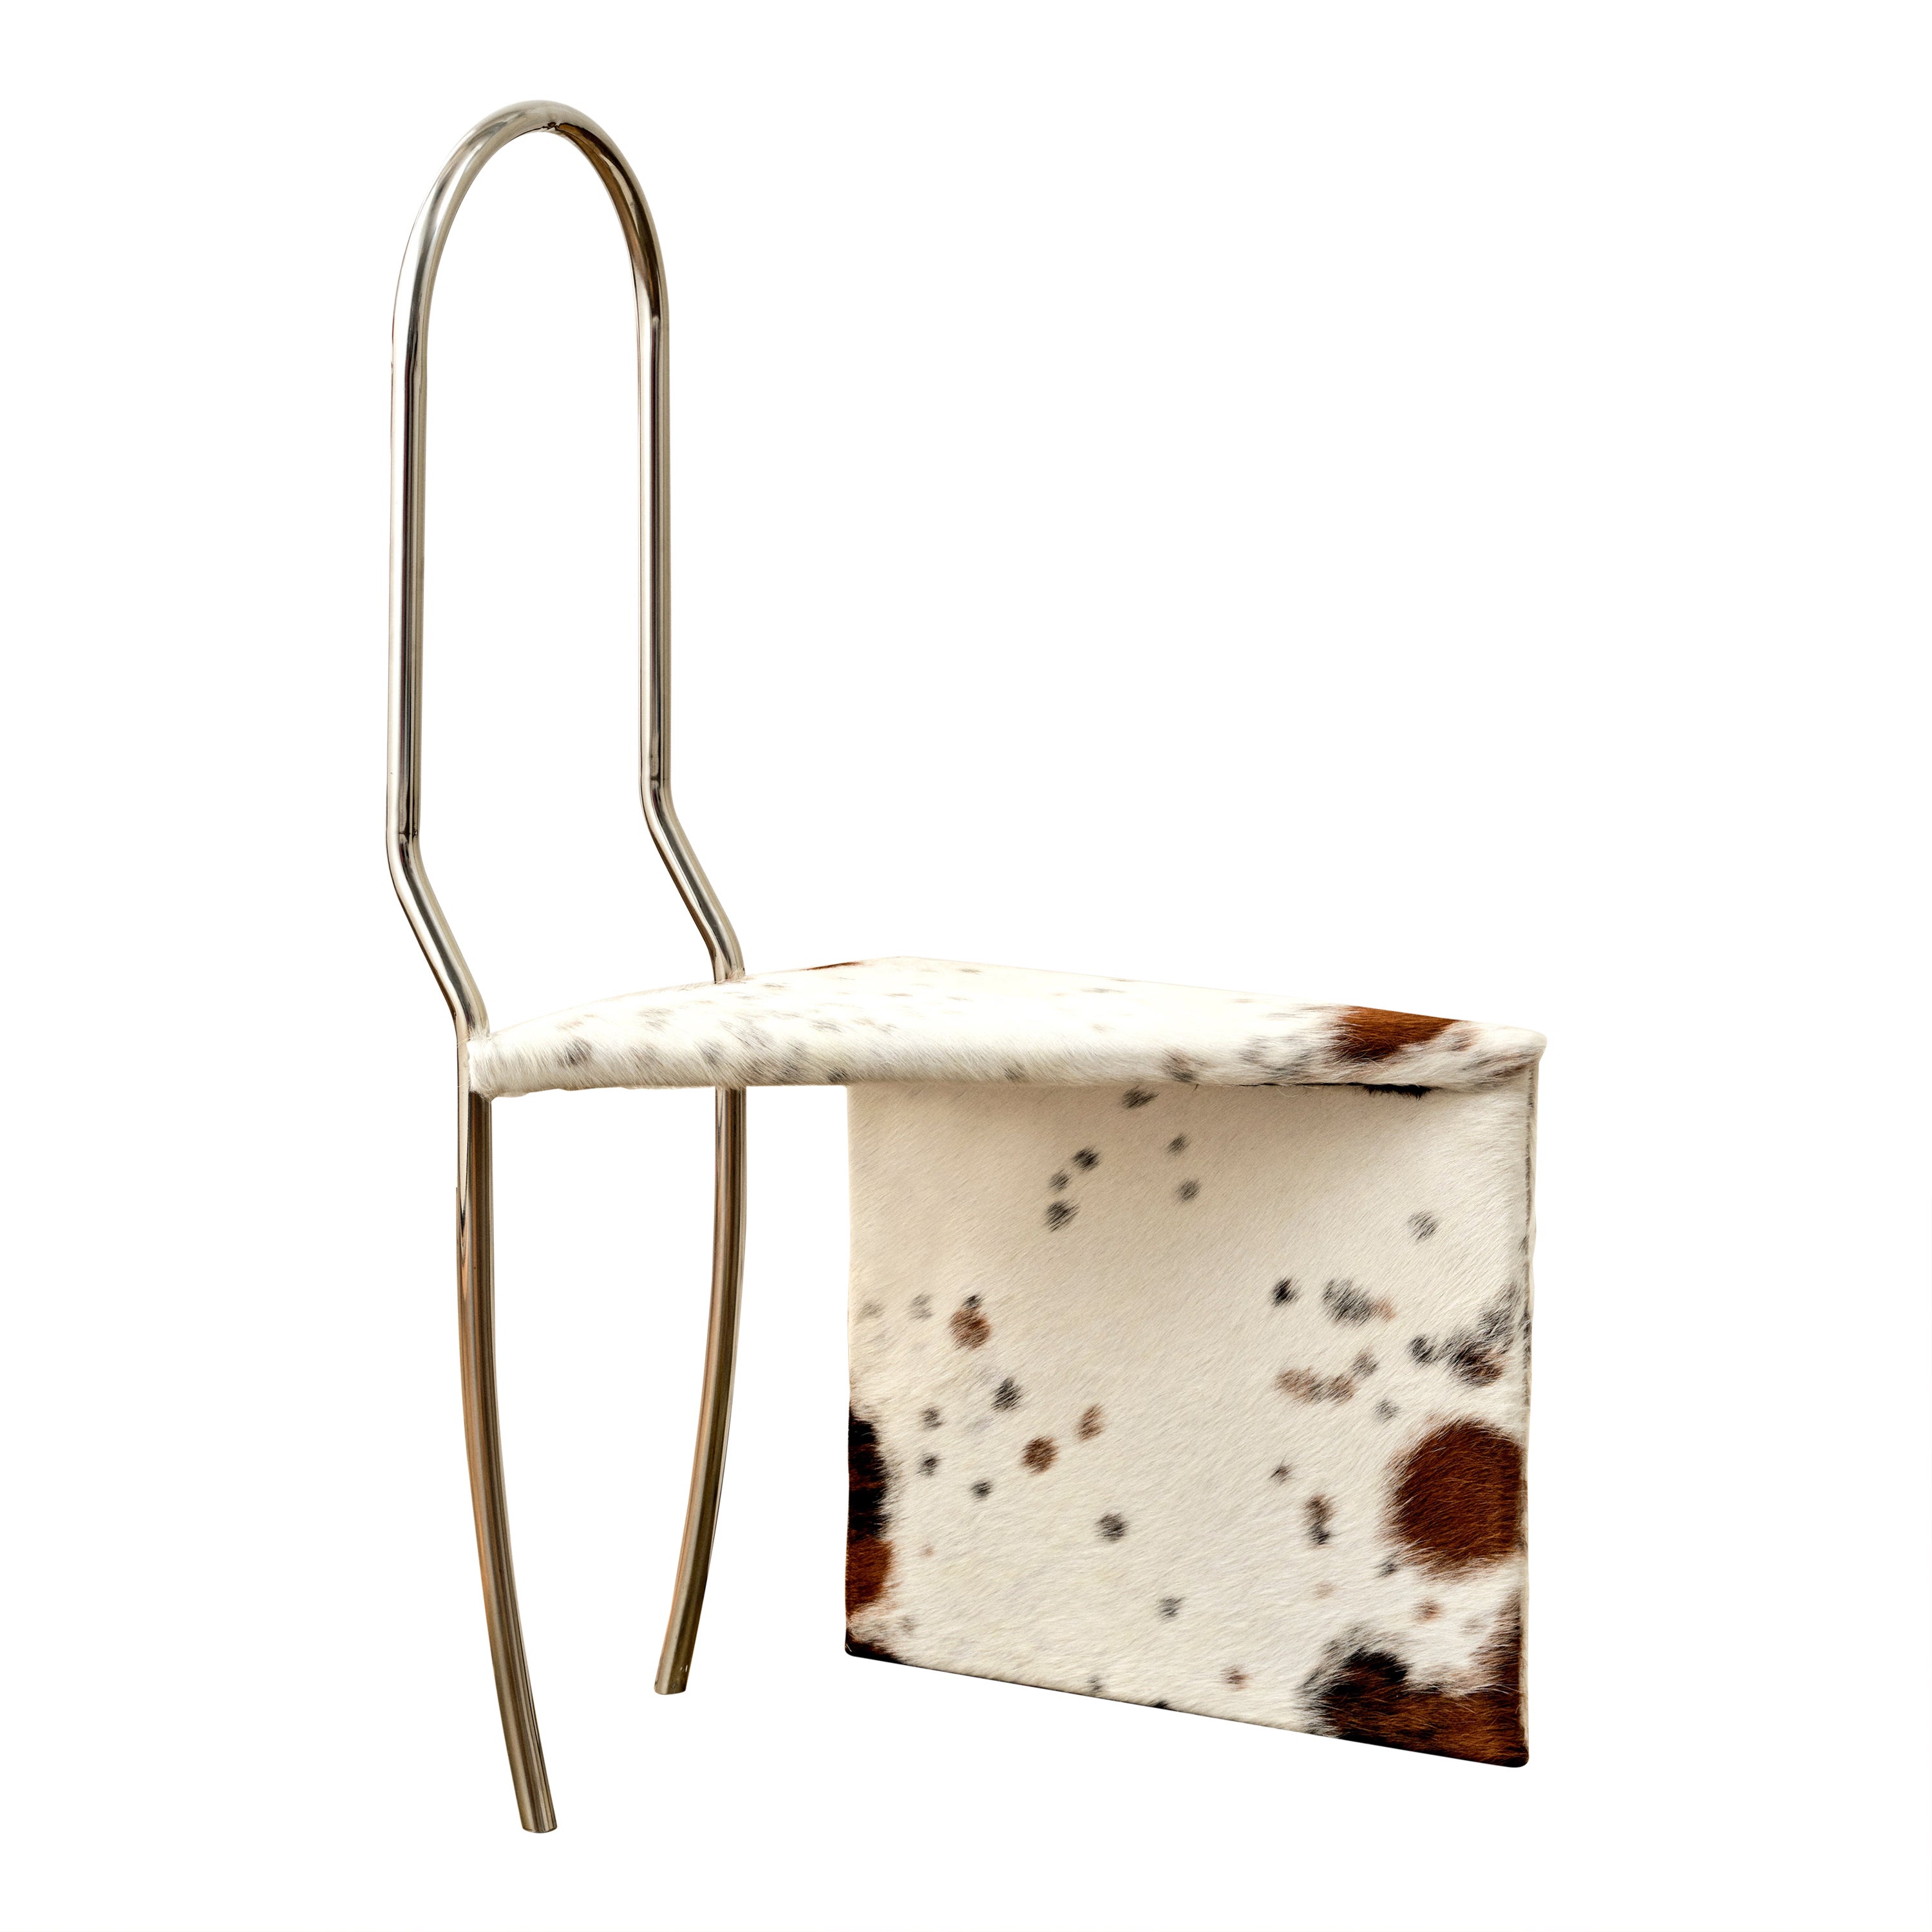 Animate Objects Twist Stainless Steel Chair with Natural Cowhide Leather